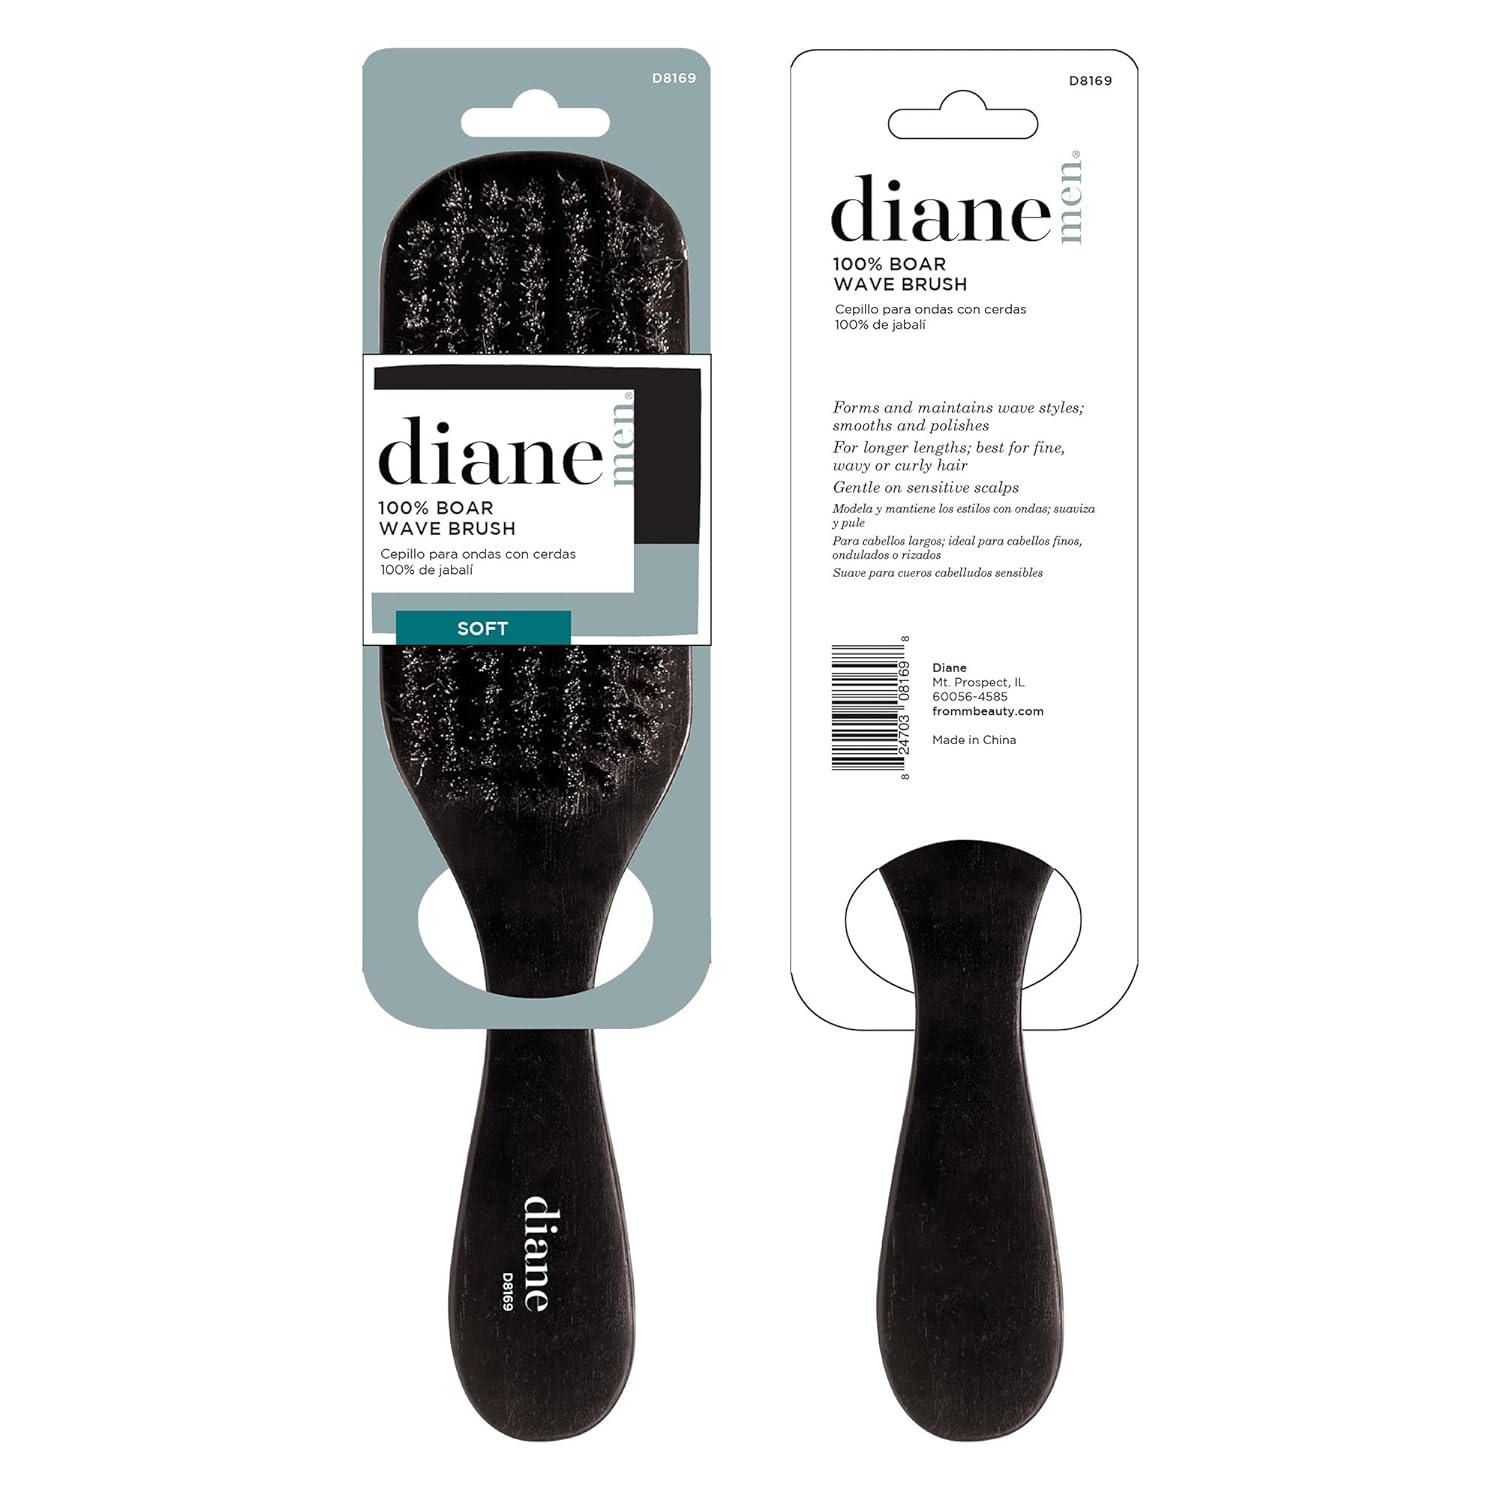 Diane 100% Soft Boar Bristle Brush for Men and Women – Soft Bristles for Fine to Medium Hair – Use for Smoothing, Wave Styles, Soft on Scalp, Club Handle, D8169 : Hair Brushes : Beauty & Personal Care